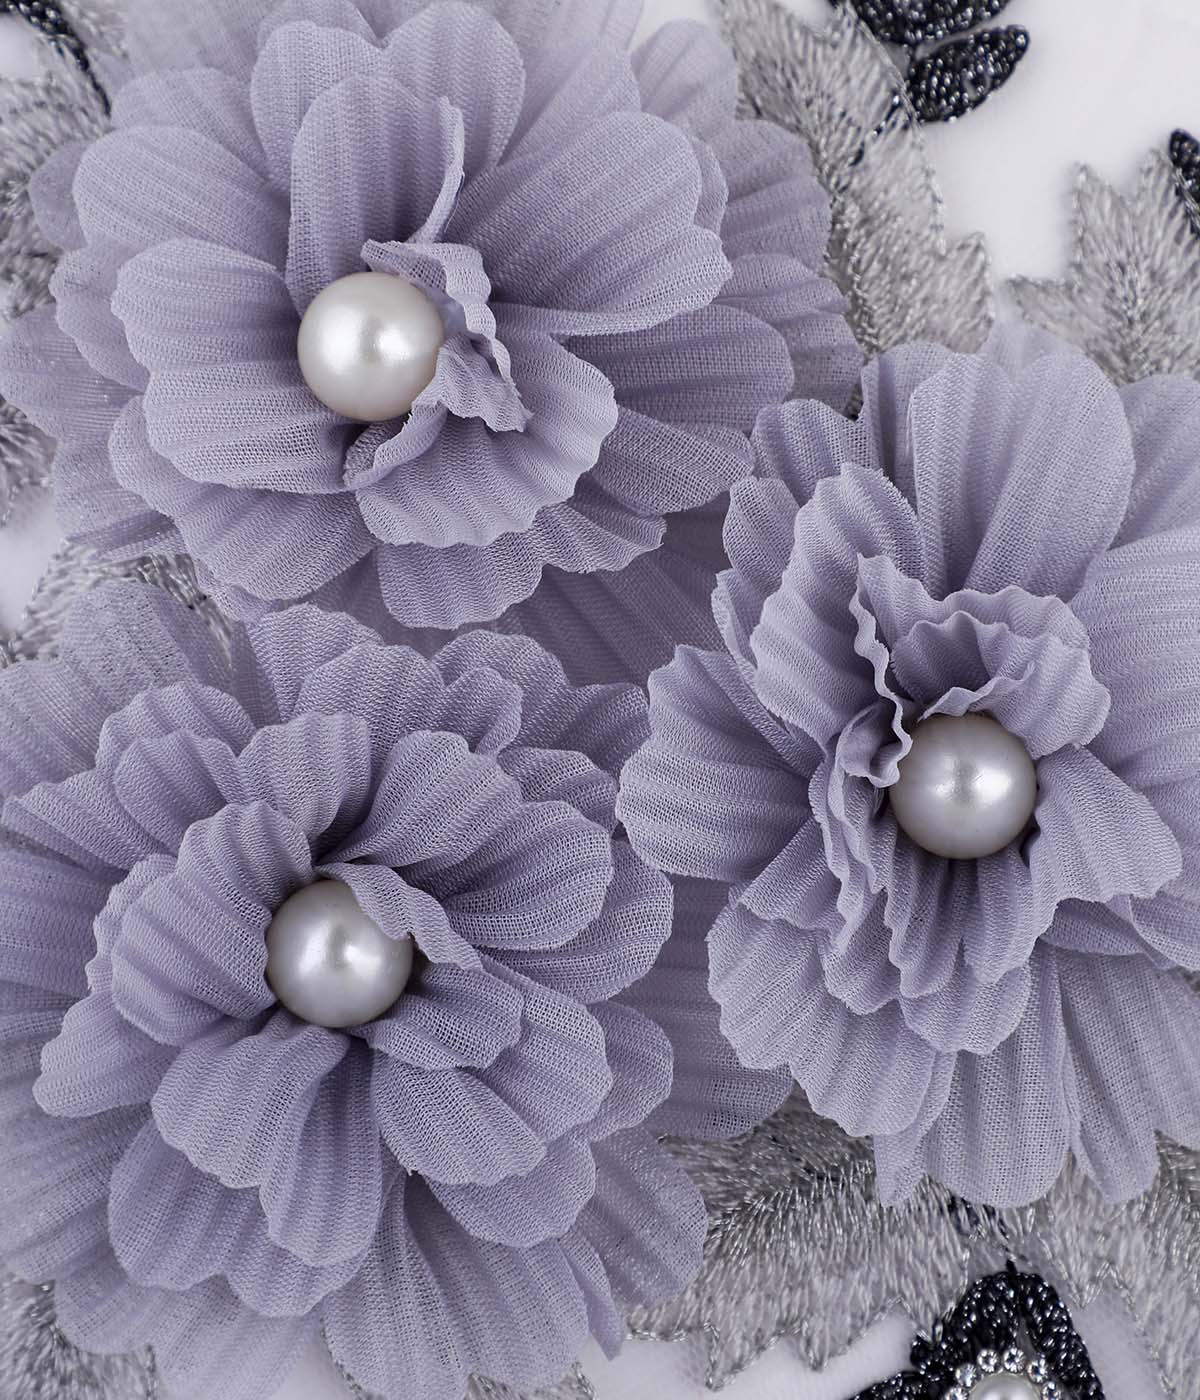 Decorative Floral Patches for Designer Baby Frocks & Bridal Gowns